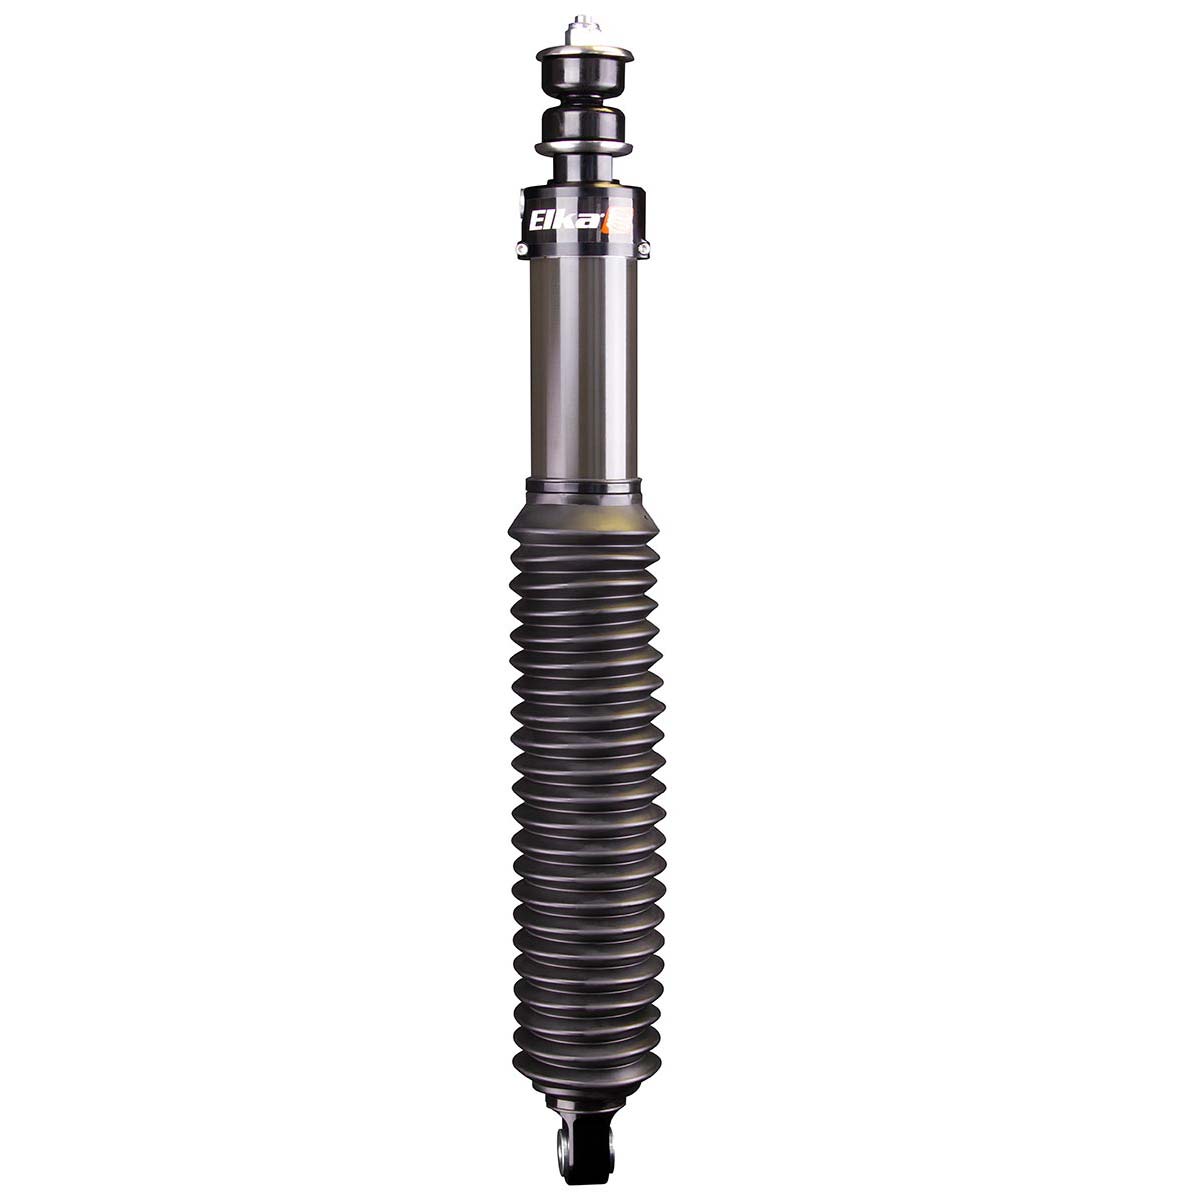 2.5 IFP REAR SHOCKS for TOYOTA 4RUNNER, 2003 to 2009 (0 in. to 2 in. lift) - RA Motorsports Canada